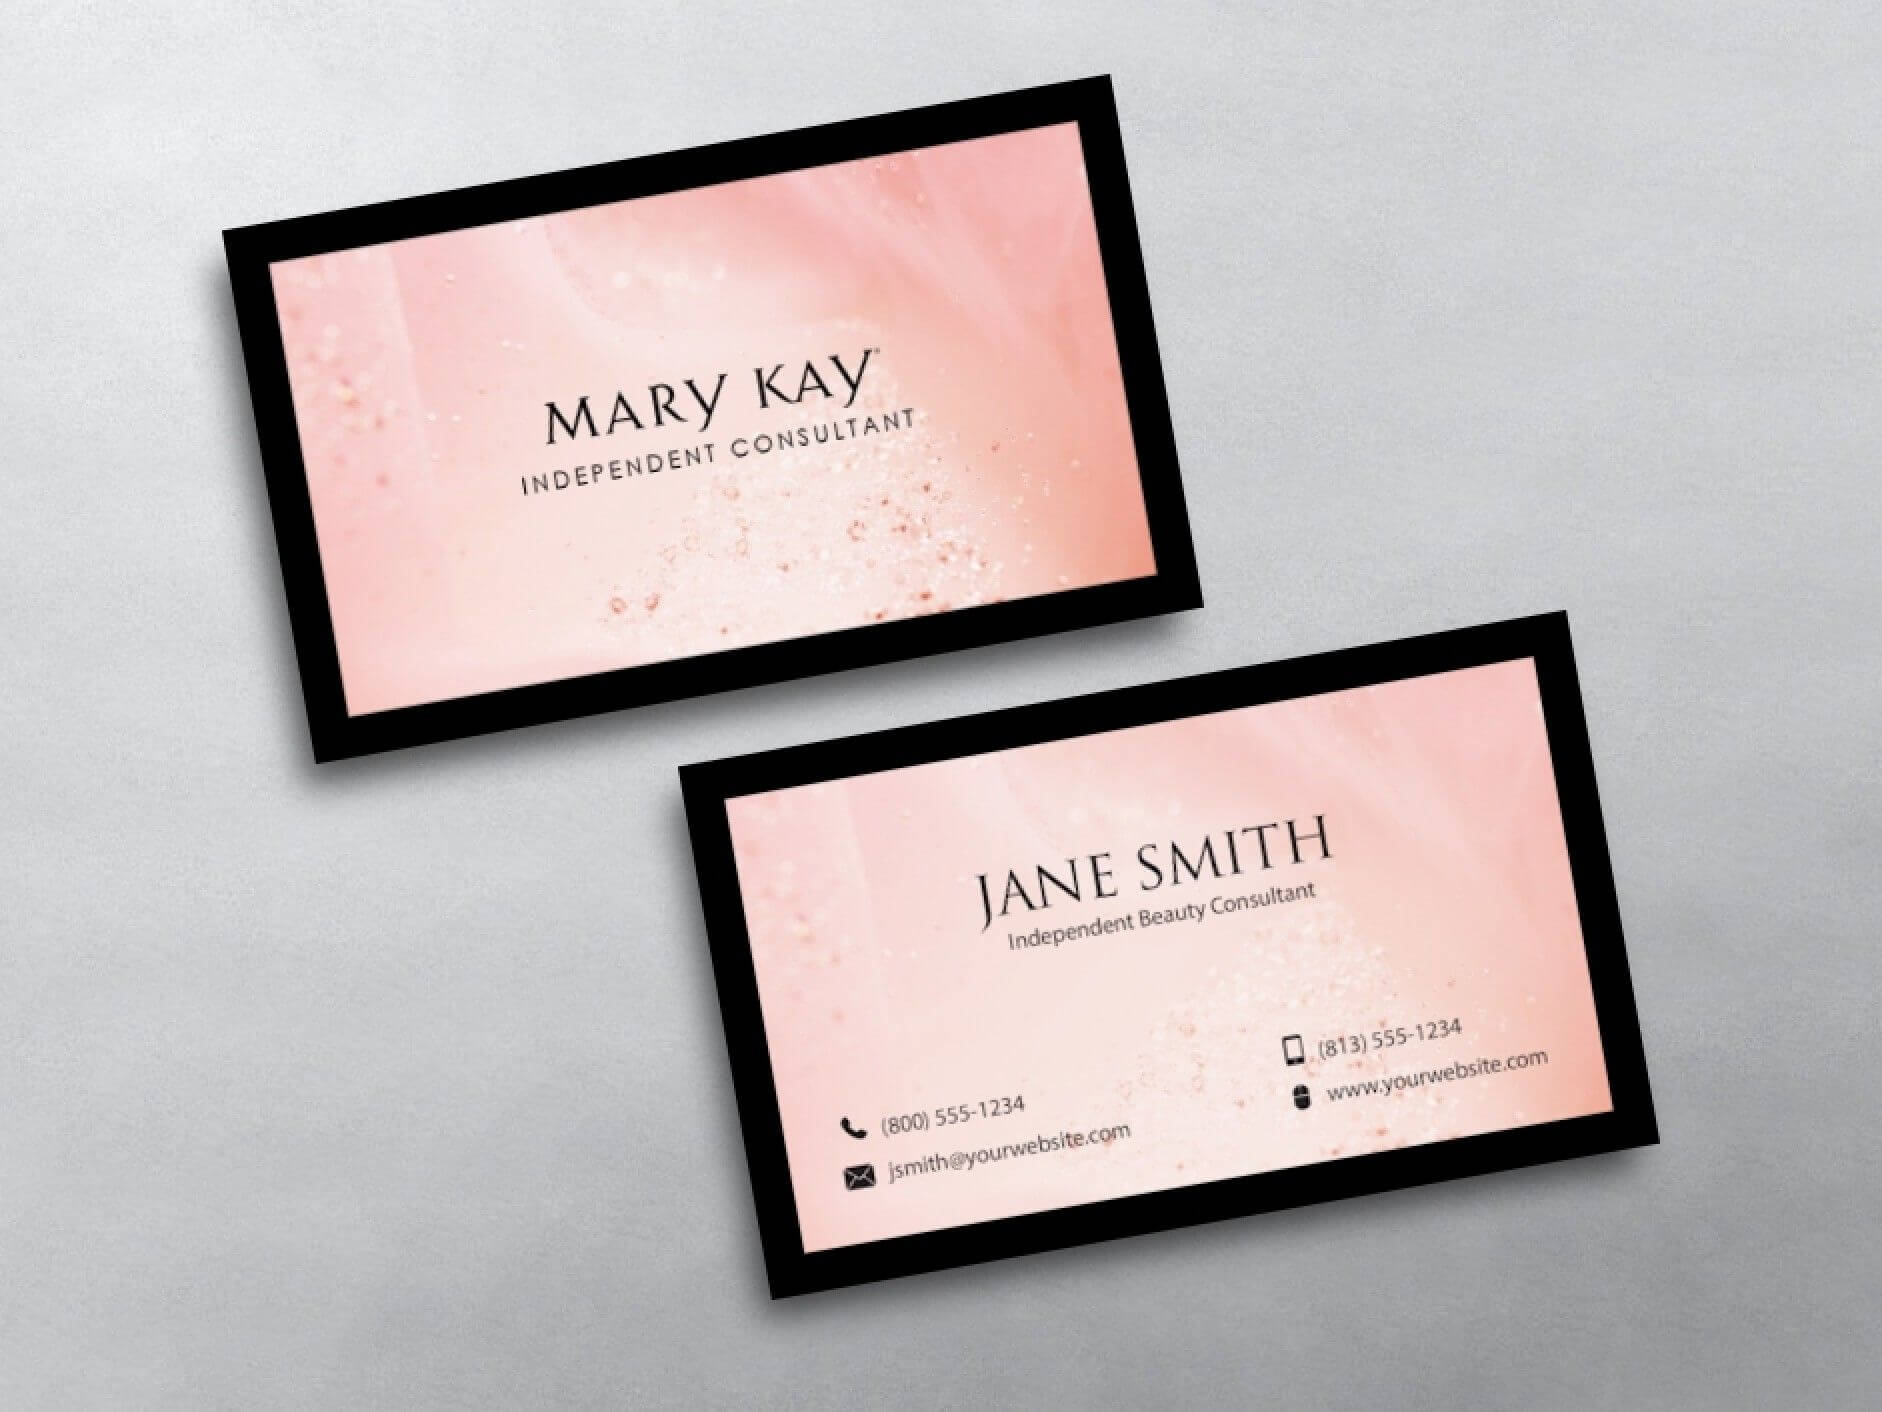 Mary Kay Business Cards | Mary Kay Business In 2019 | Mary Pertaining To Mary Kay Business Cards Templates Free